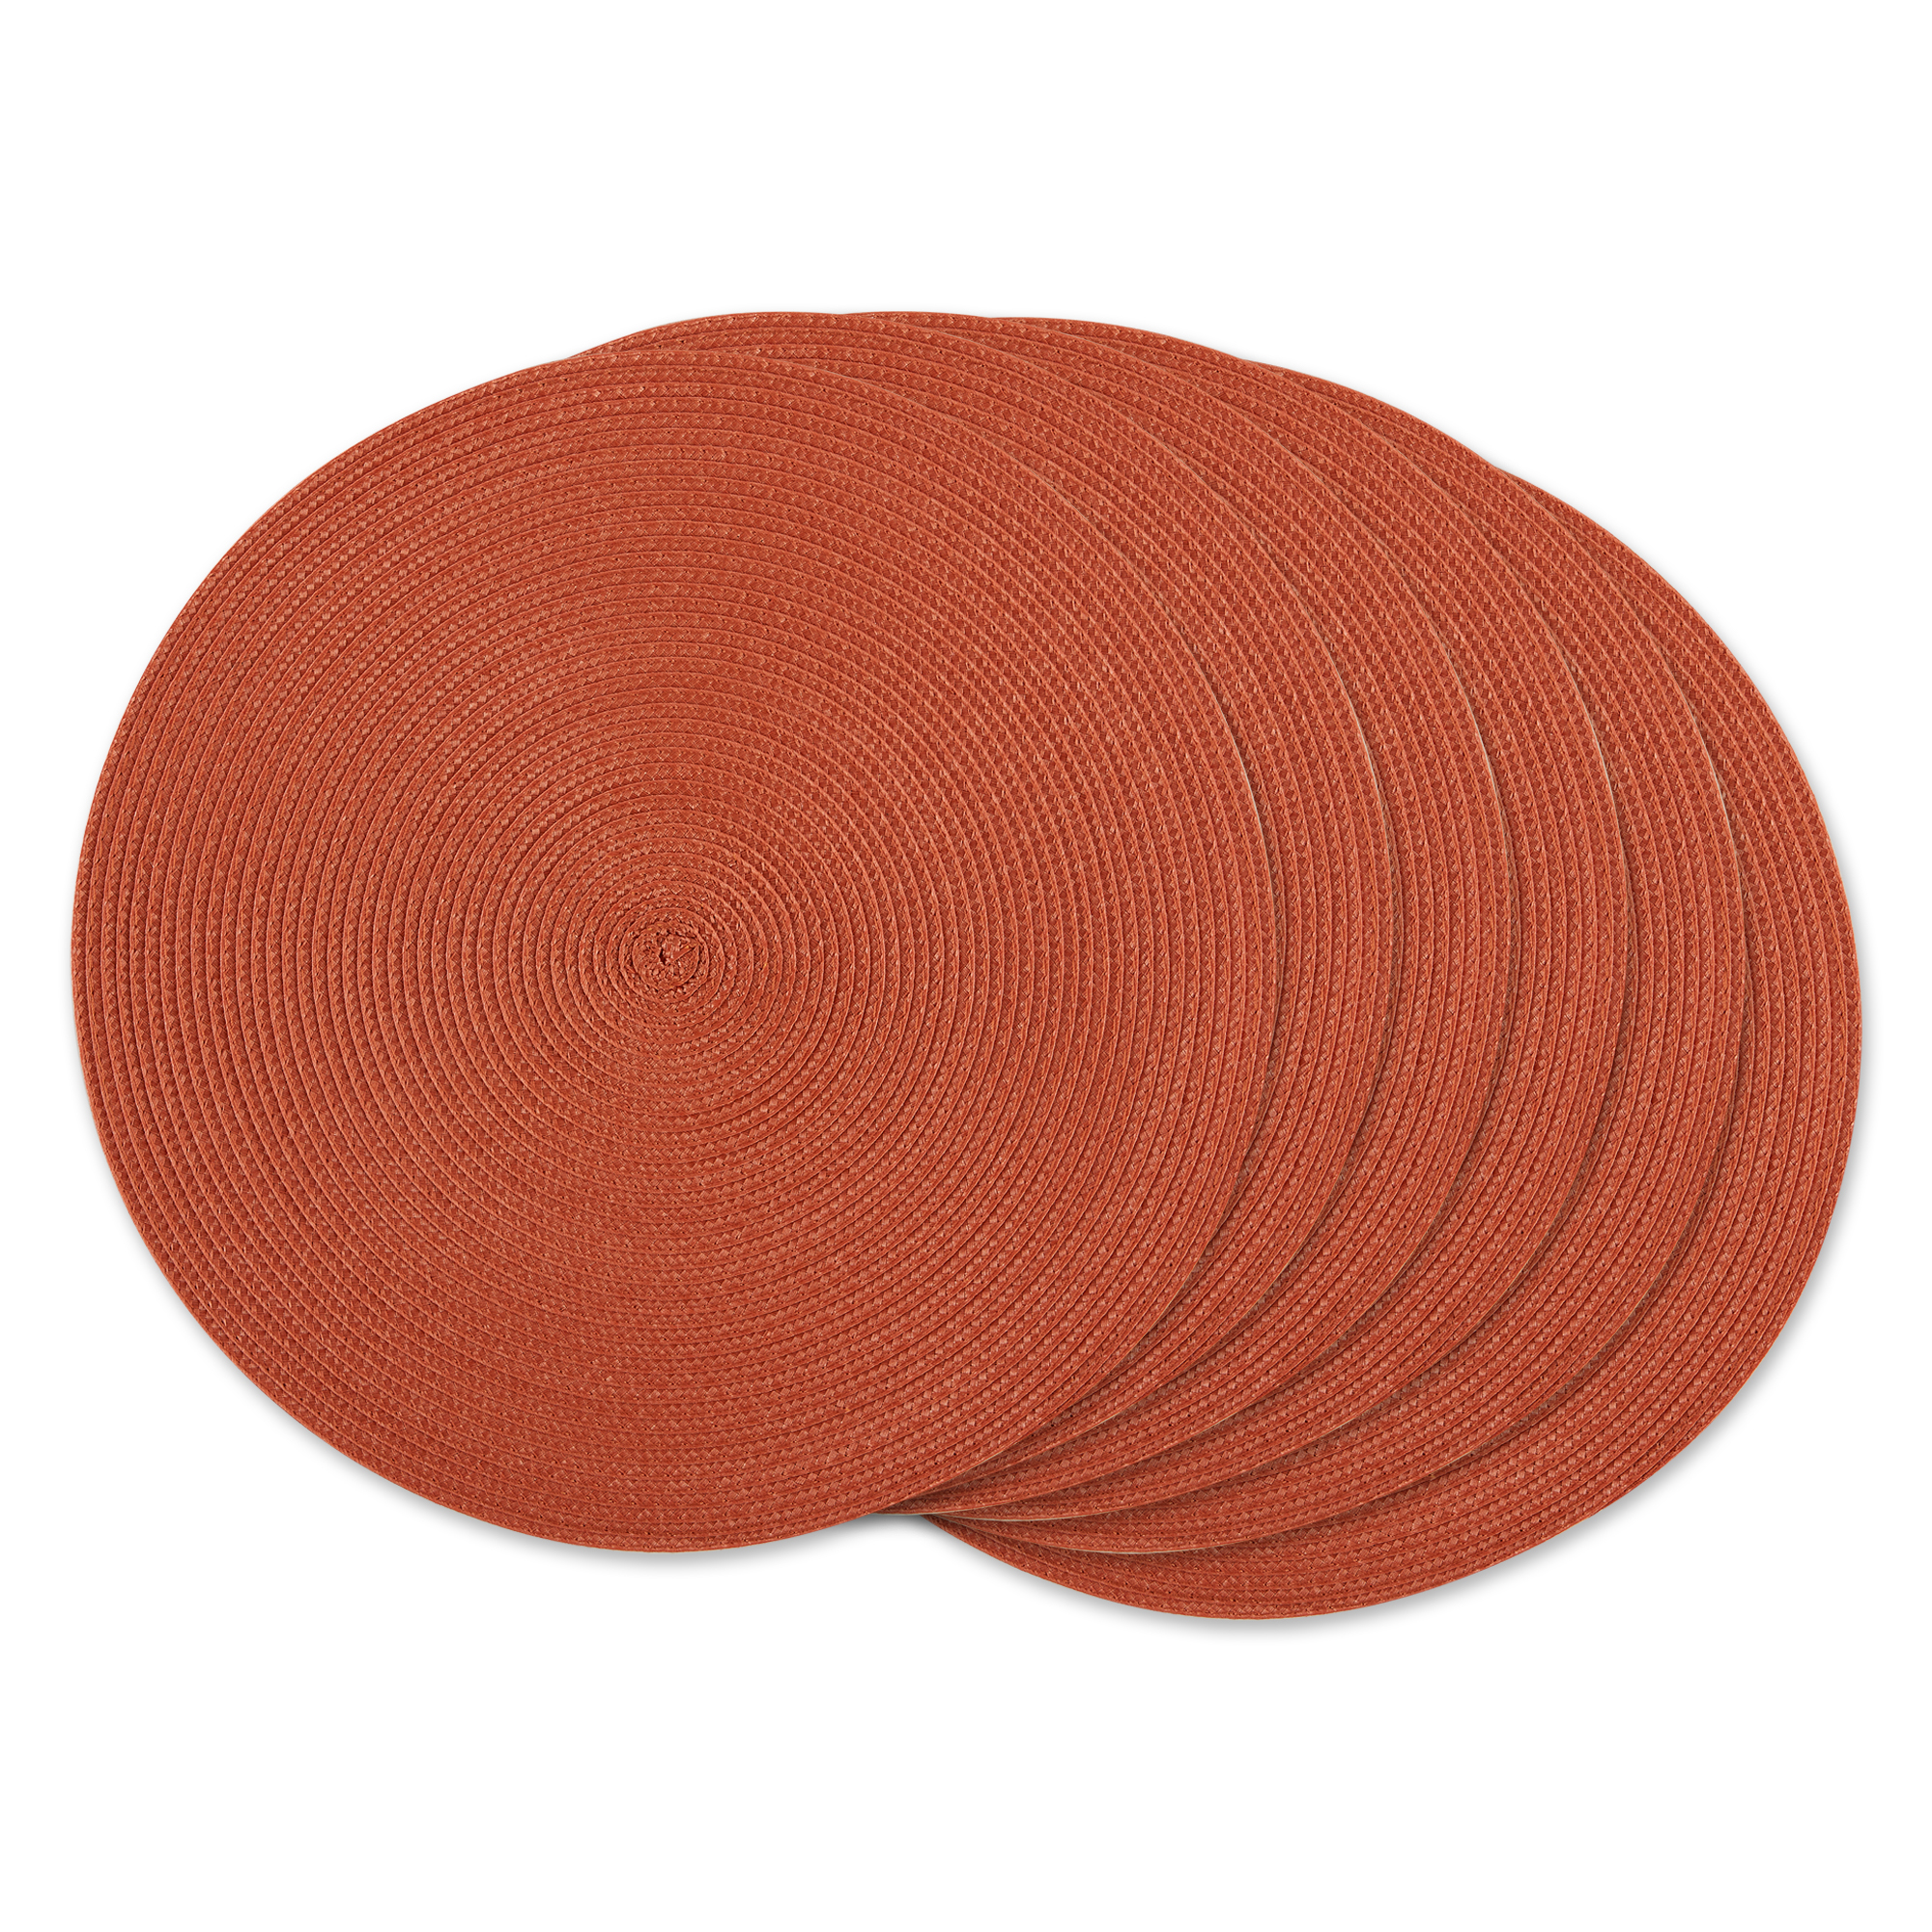 DII Spice Round PP Woven Placemat Set of 6